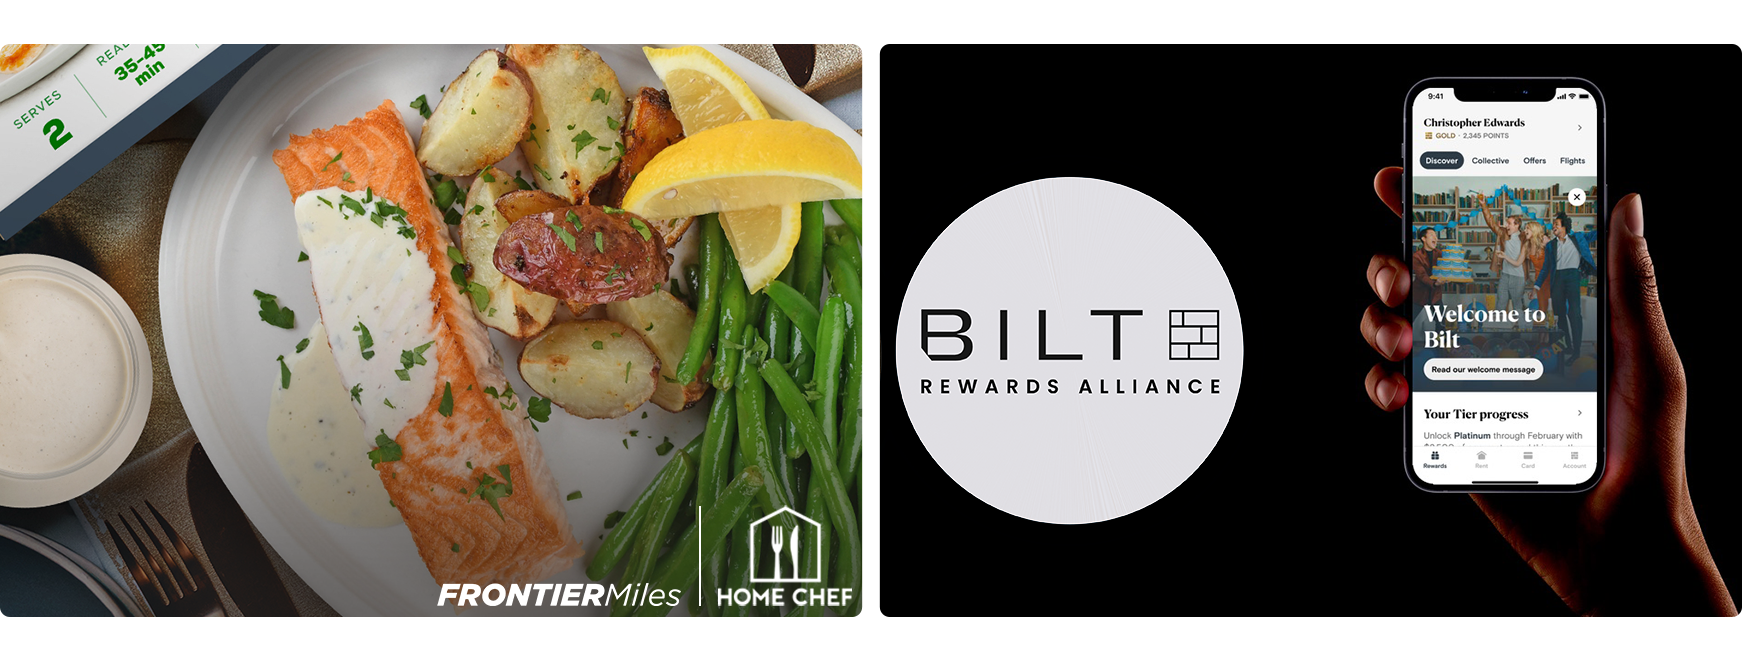 Example of two partnership advertisements: one for HomeChef and one for Bilt rewards alliance.